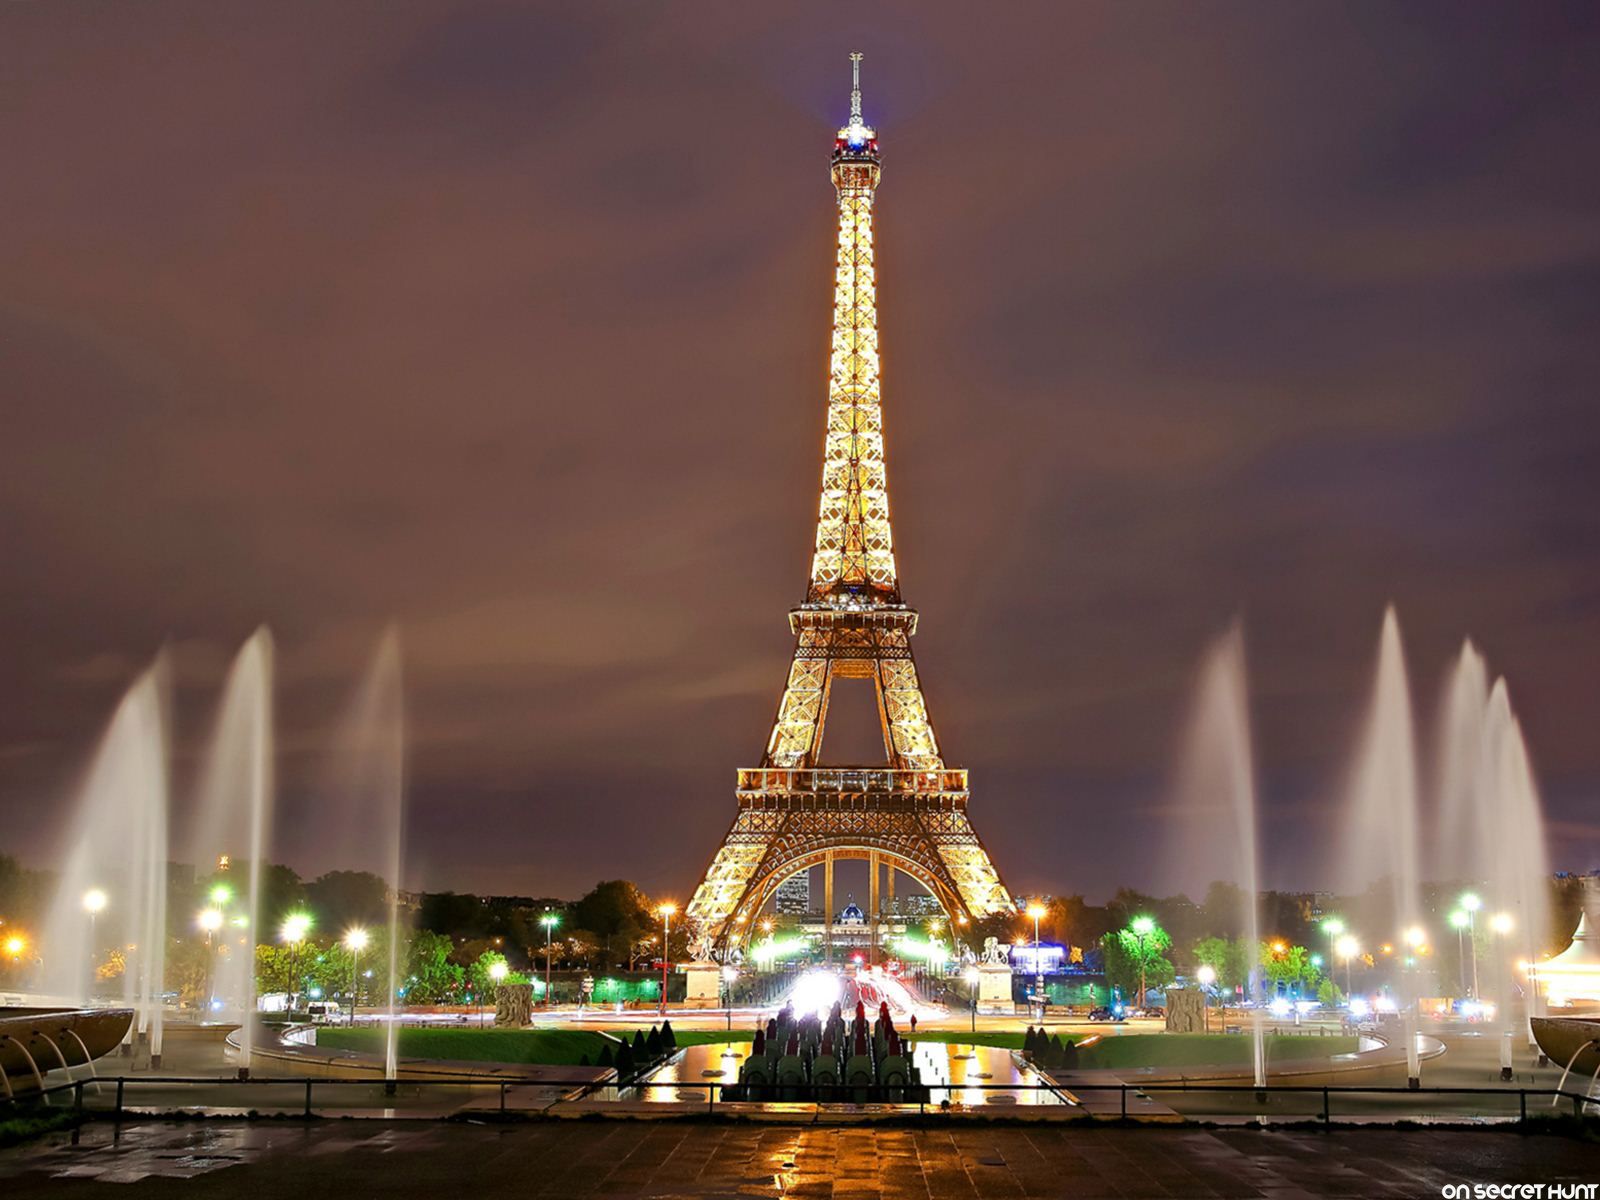 Gallery For Gt Eiffel Tower Paris At Night